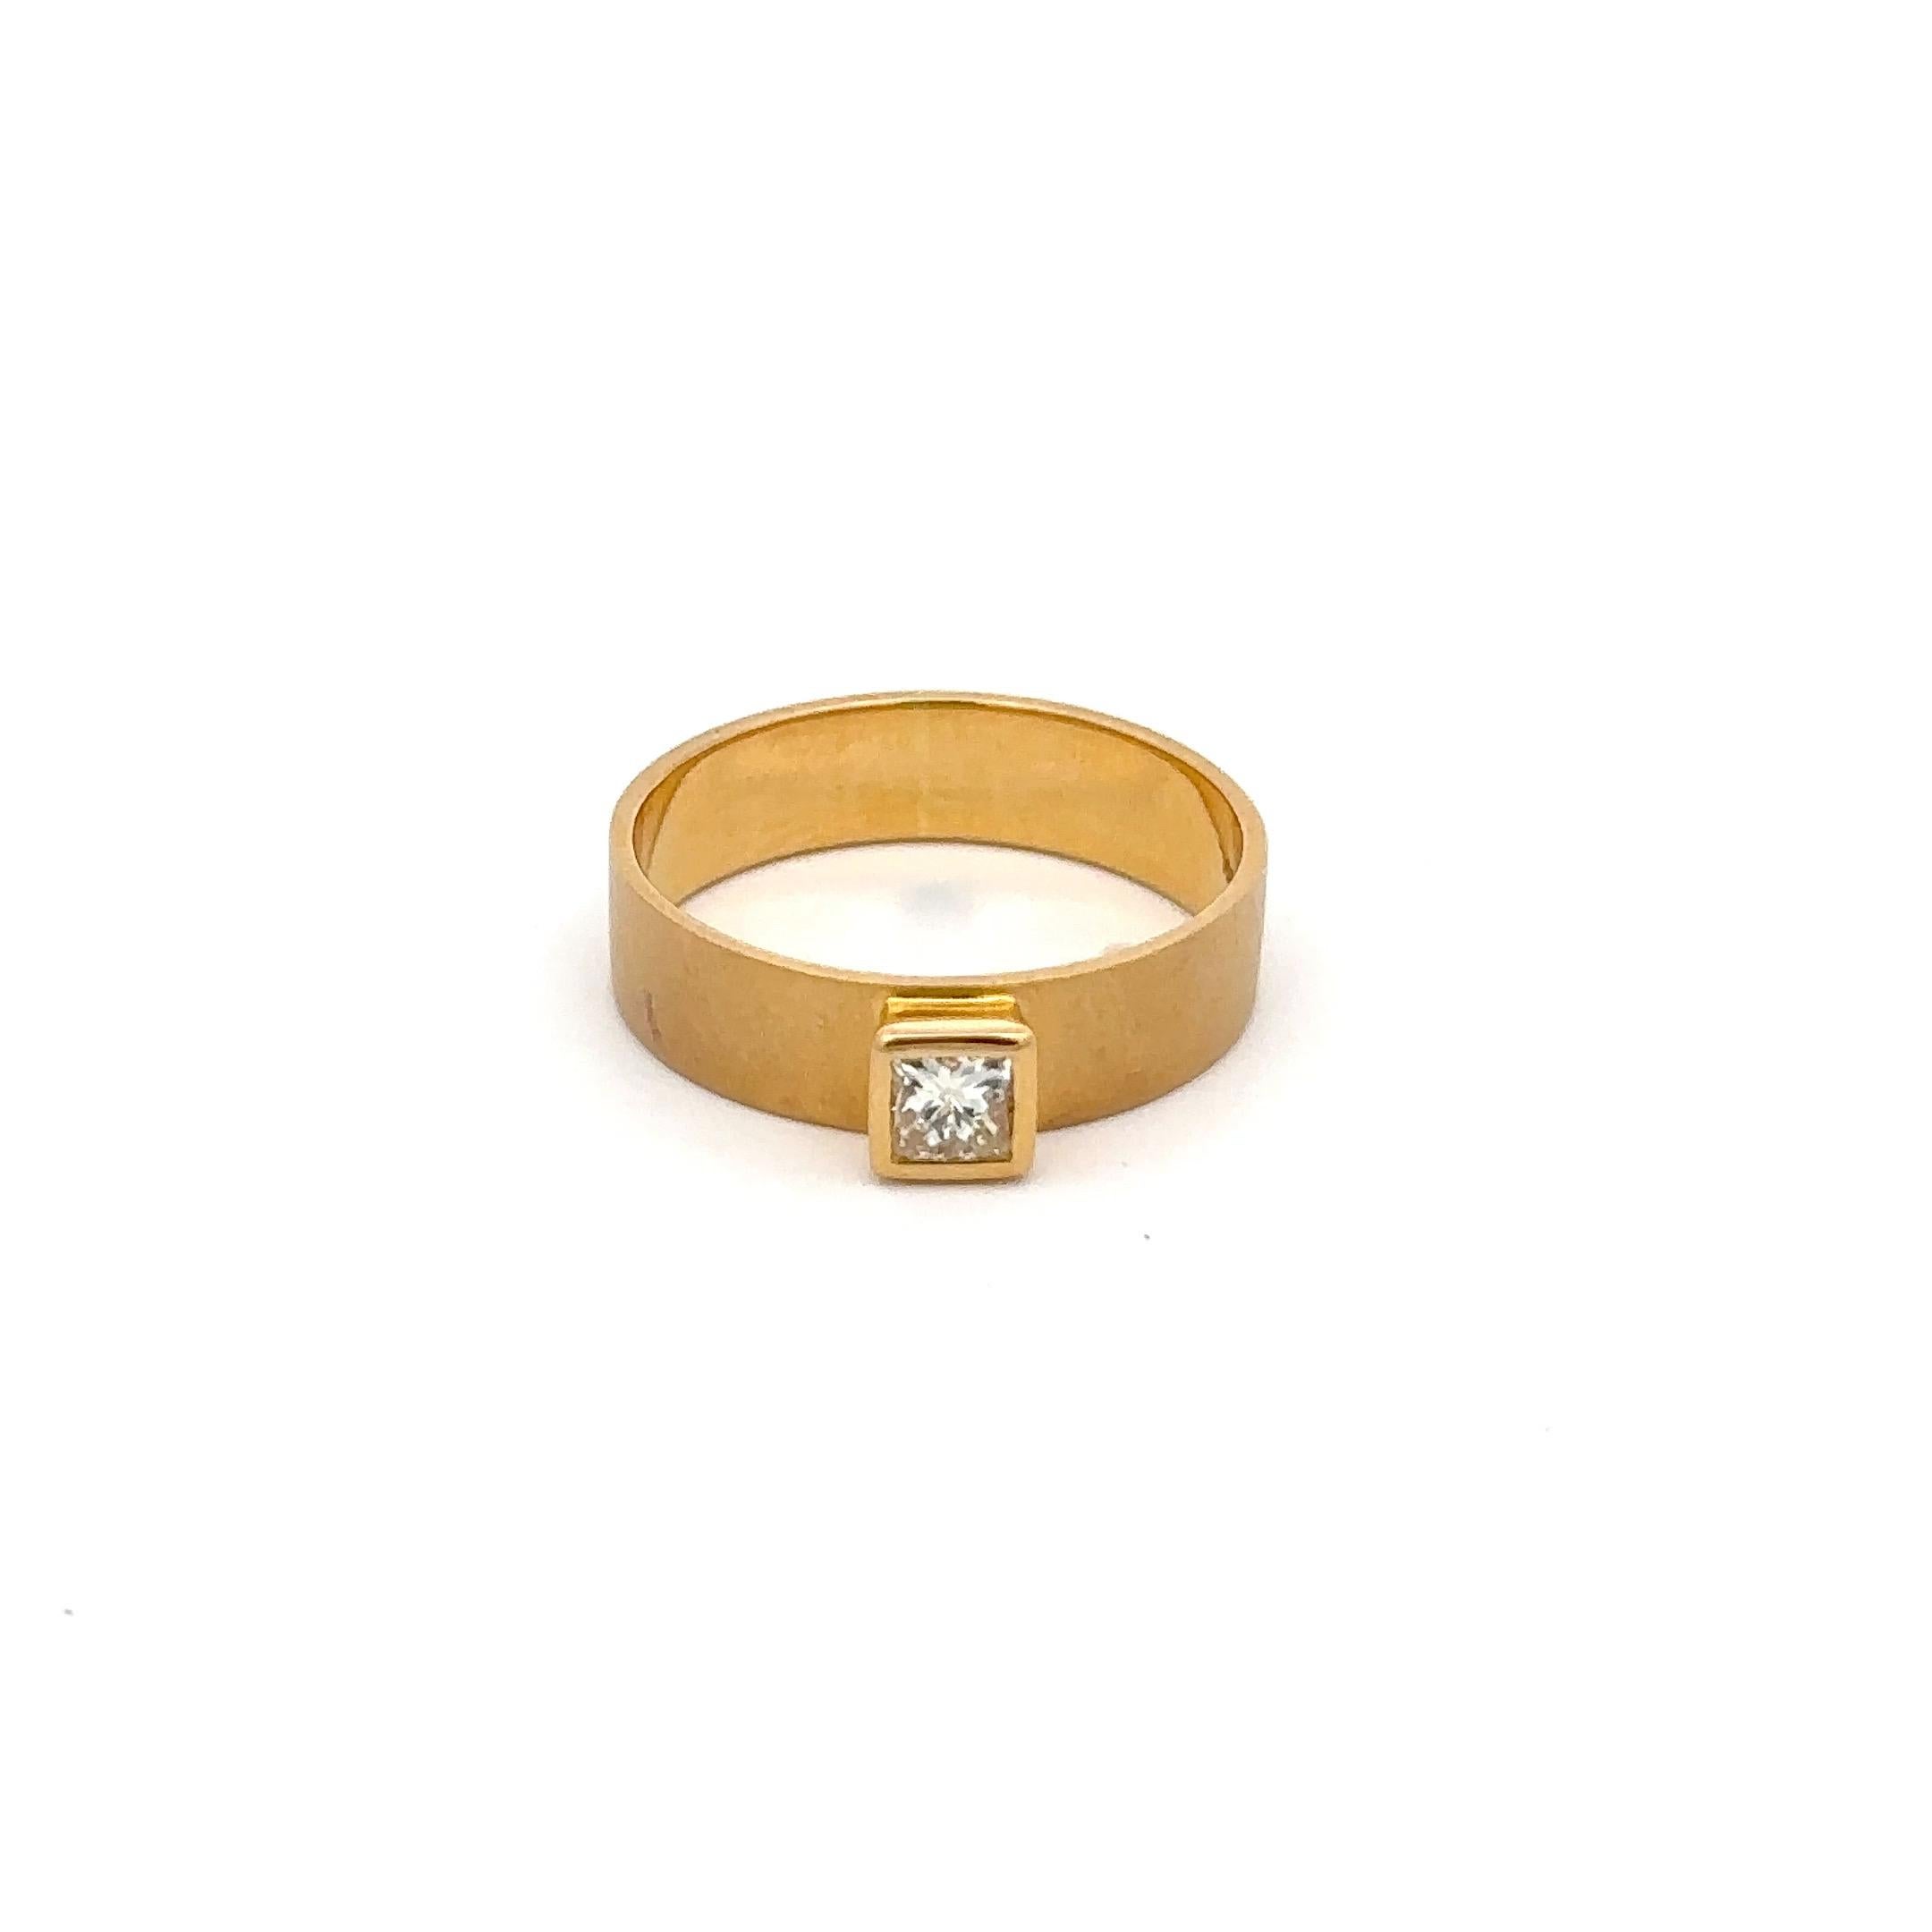 For Sale:  Unisex Princess Cut Diamond Solitaire Ring 18k Solid Yellow Gold Diamond Ring 9